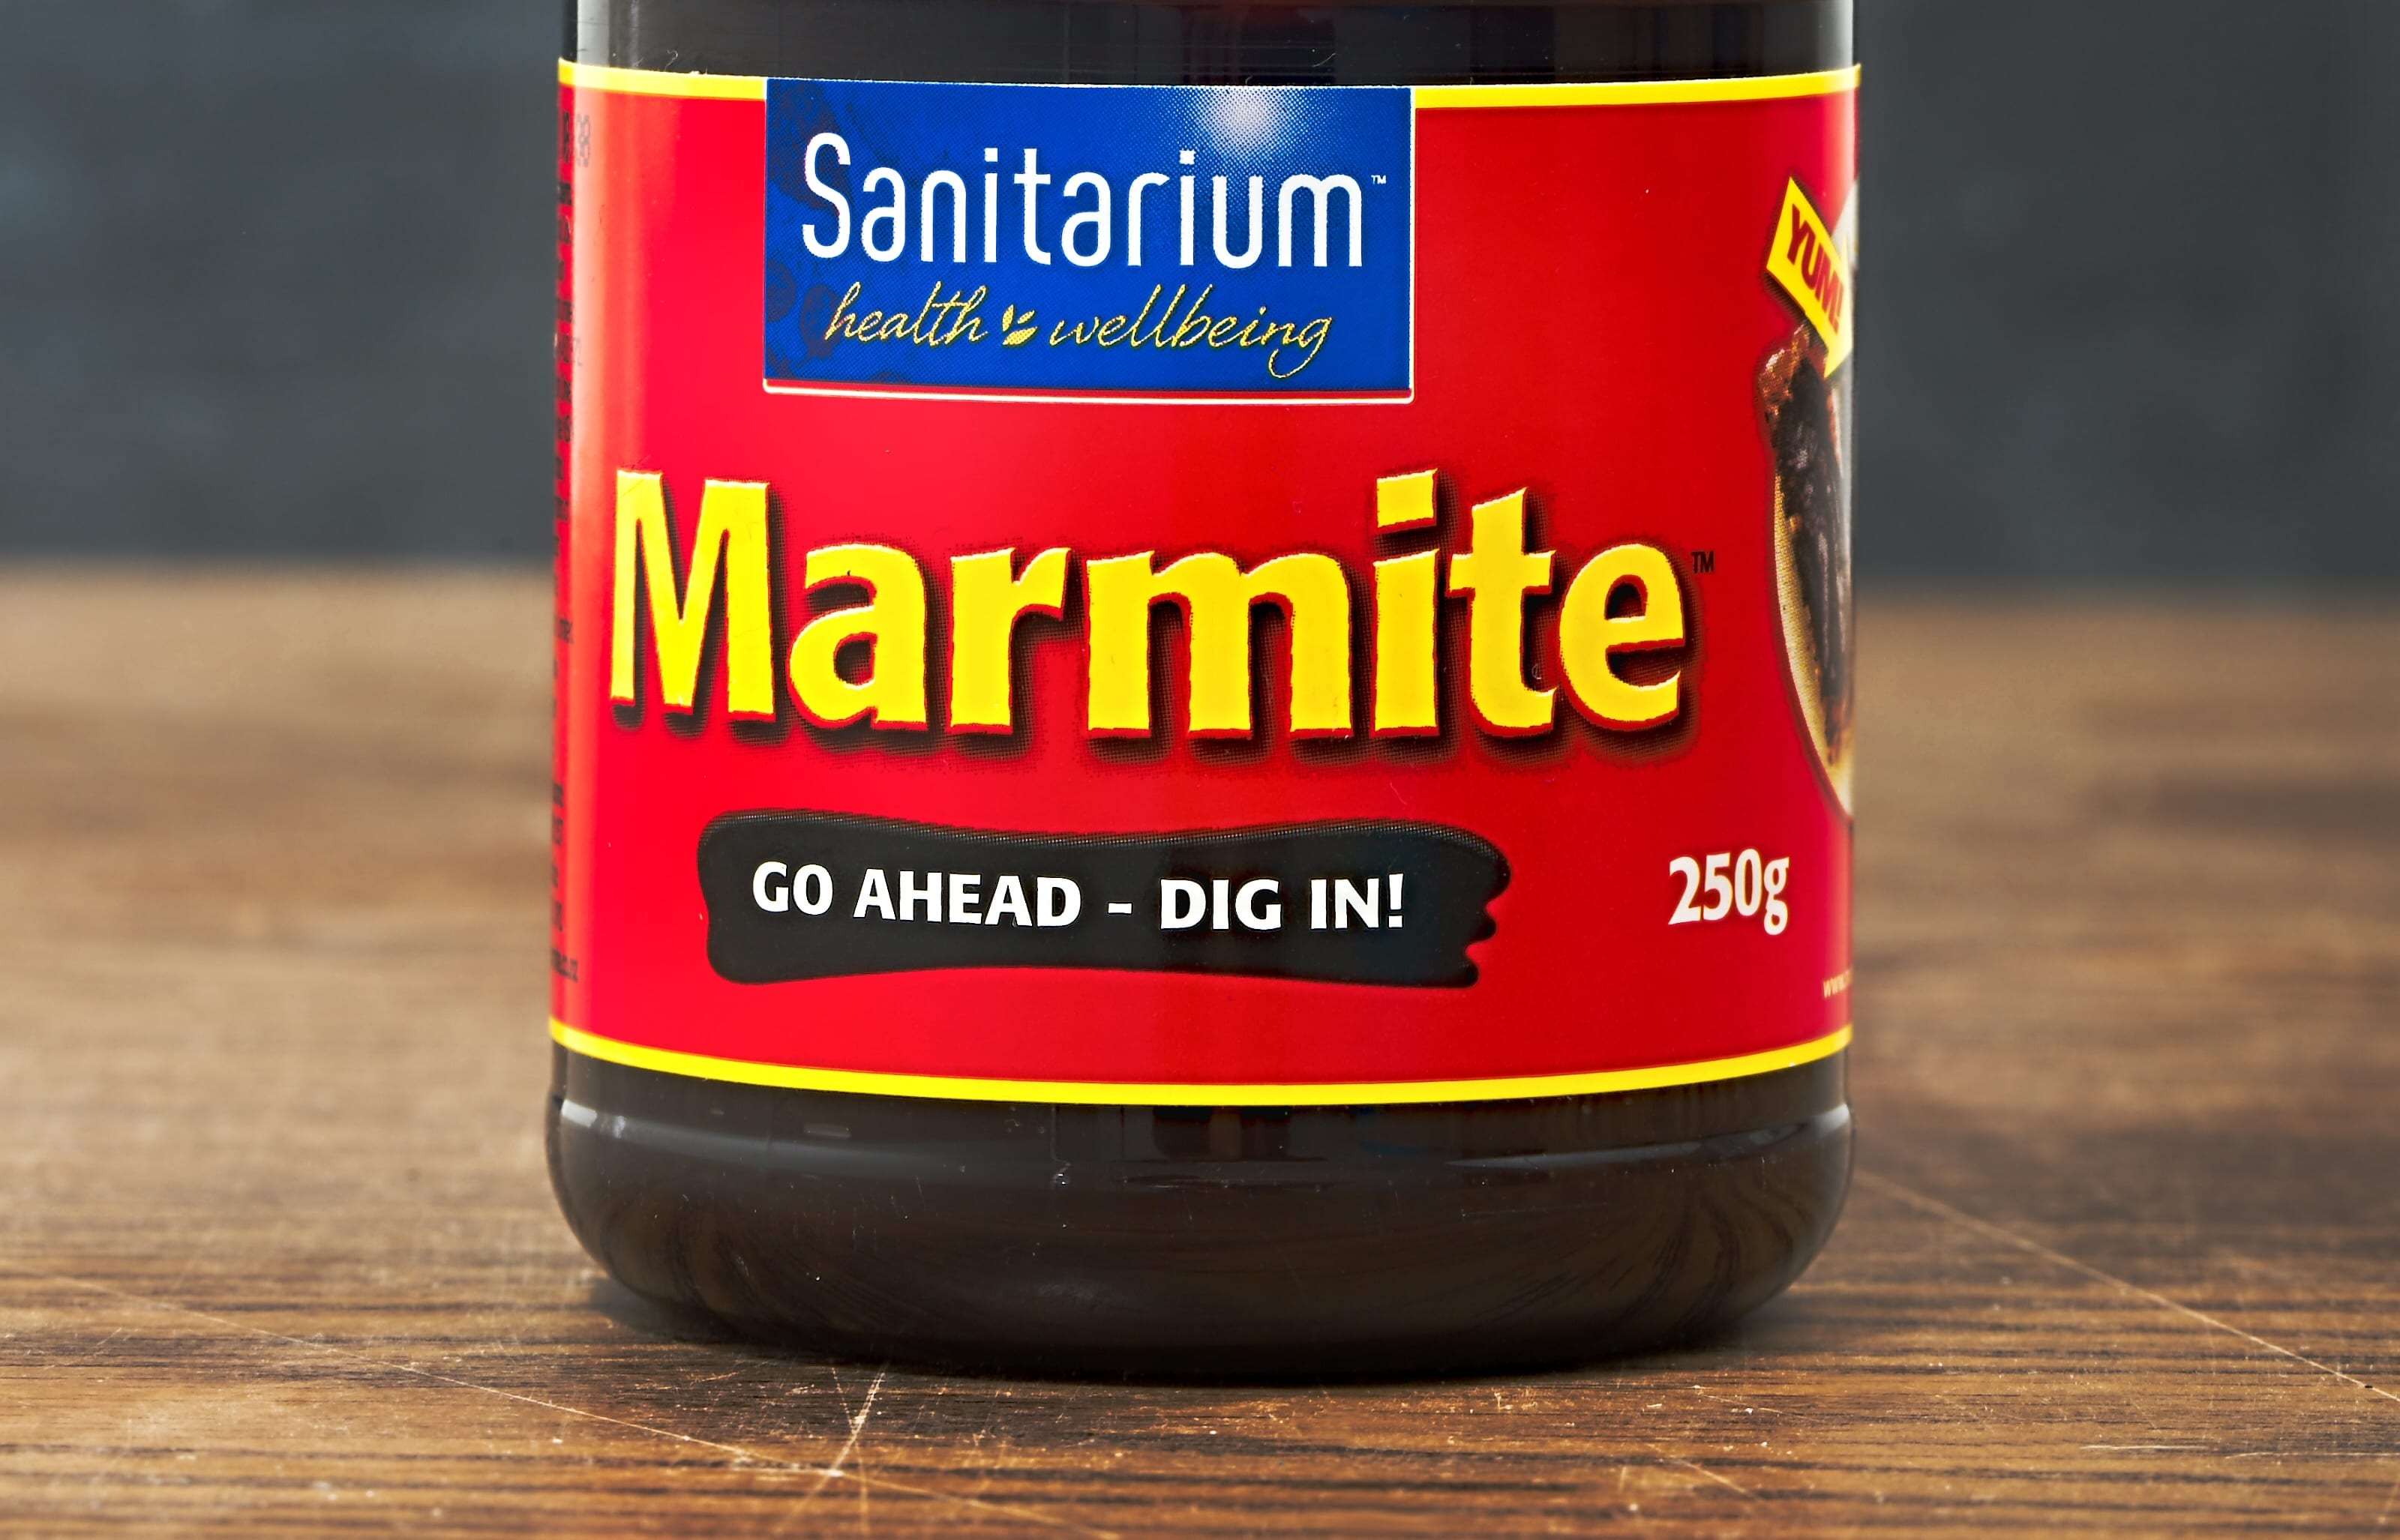 AUCKLAND, NEW ZEALAND - APRIL 02, 2016: A jar of Marmite, popular yeast extract product in New Zealand made by Sanitarium.